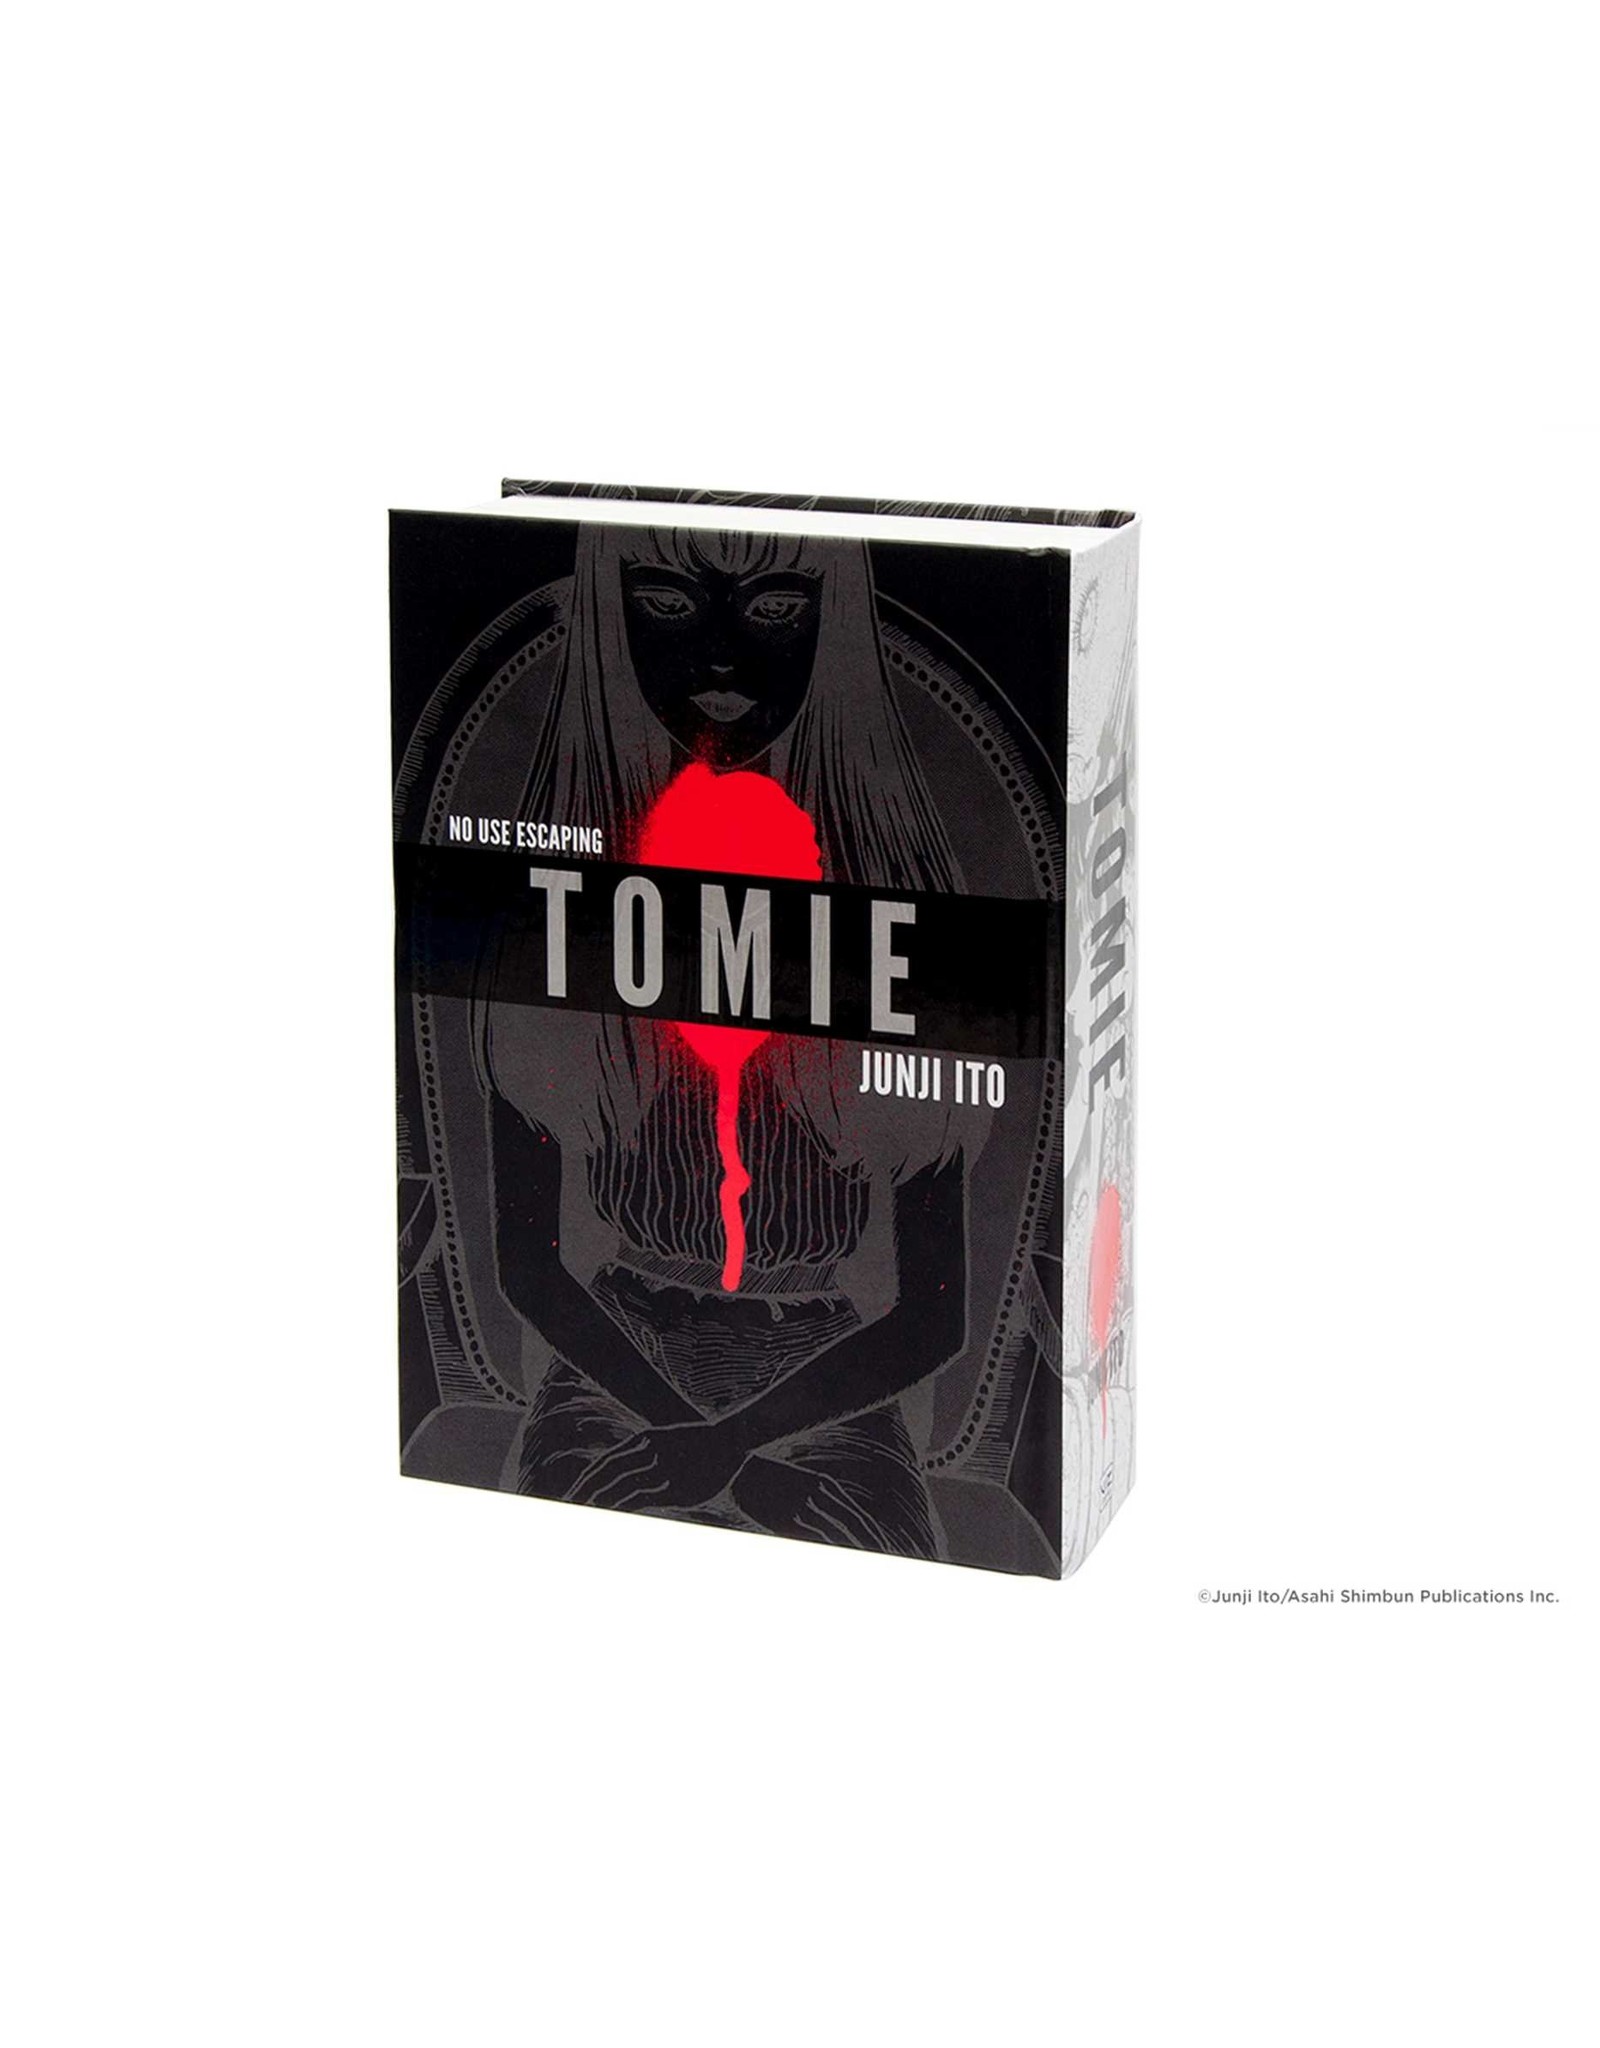 Tomie: Complete Deluxe Edition (English) - Junji Ito Manga - Hardcover